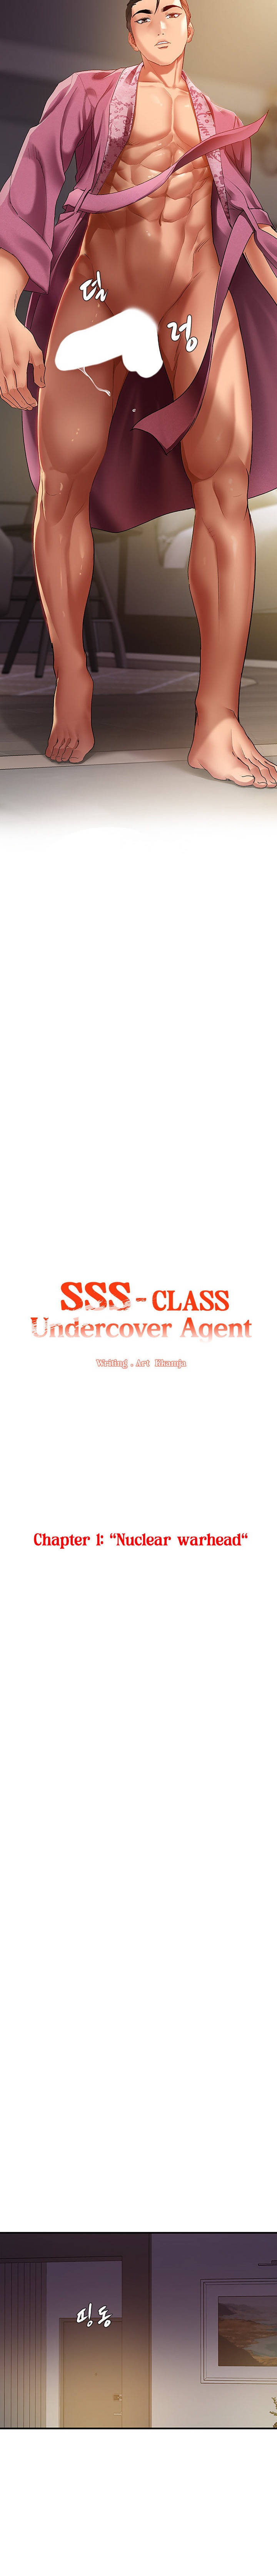 SSS-Class Undercover Agent - Chapter 1 Page 8